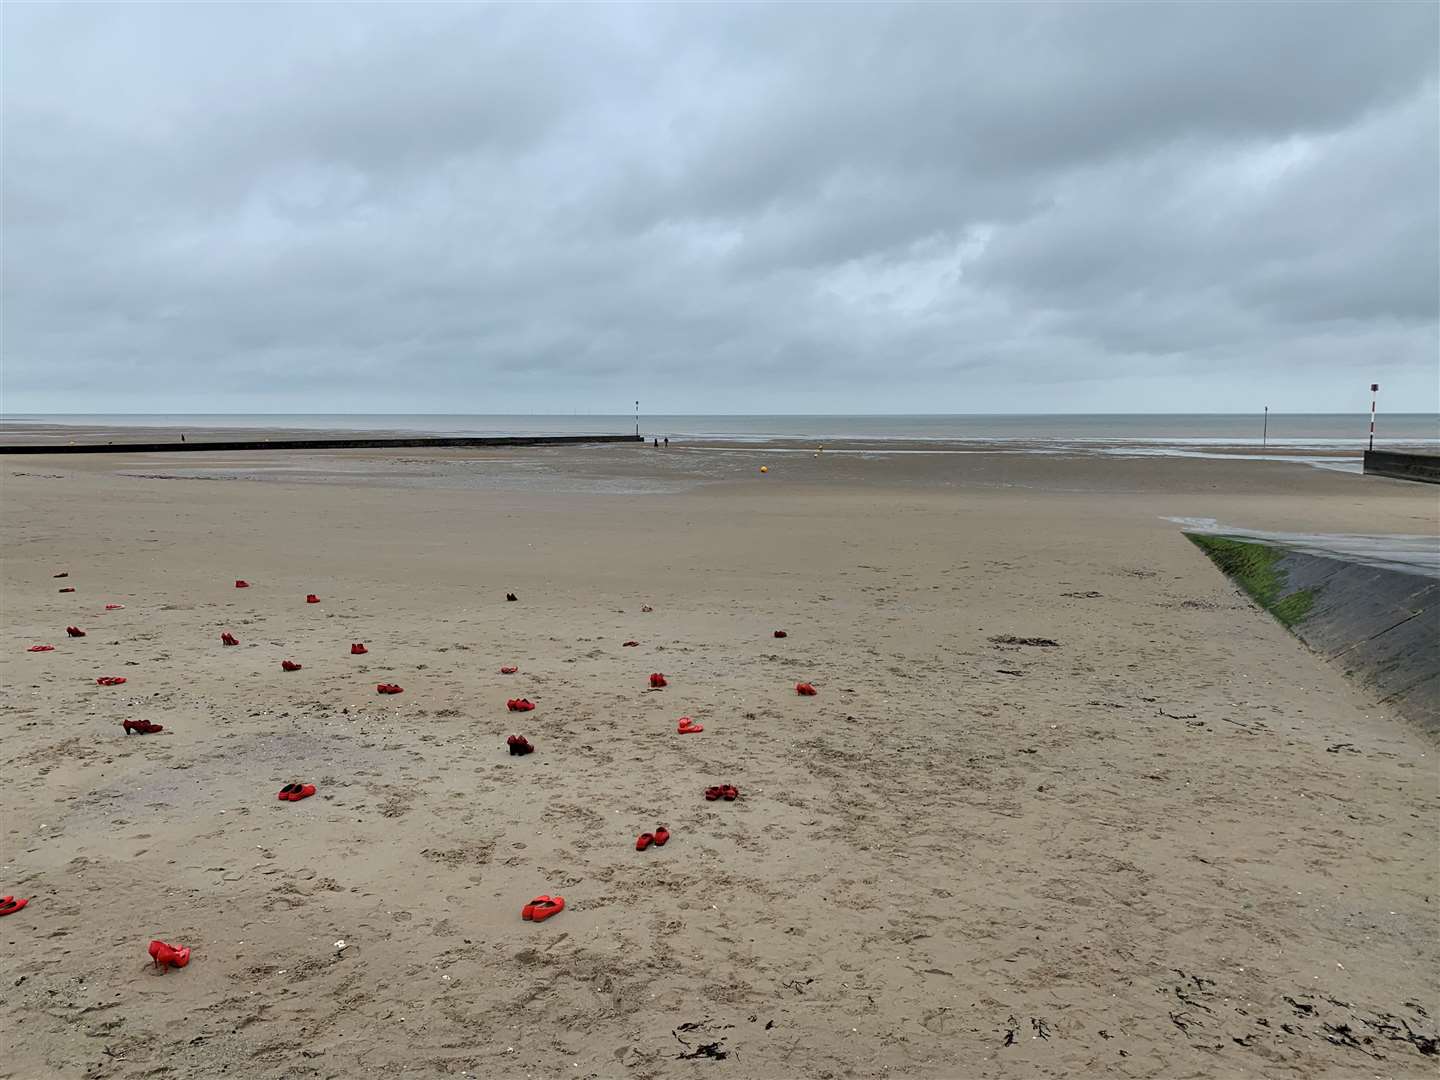 98 pairs of red shoes were put out in Birchington on what would have been Claire Knights' birthday.